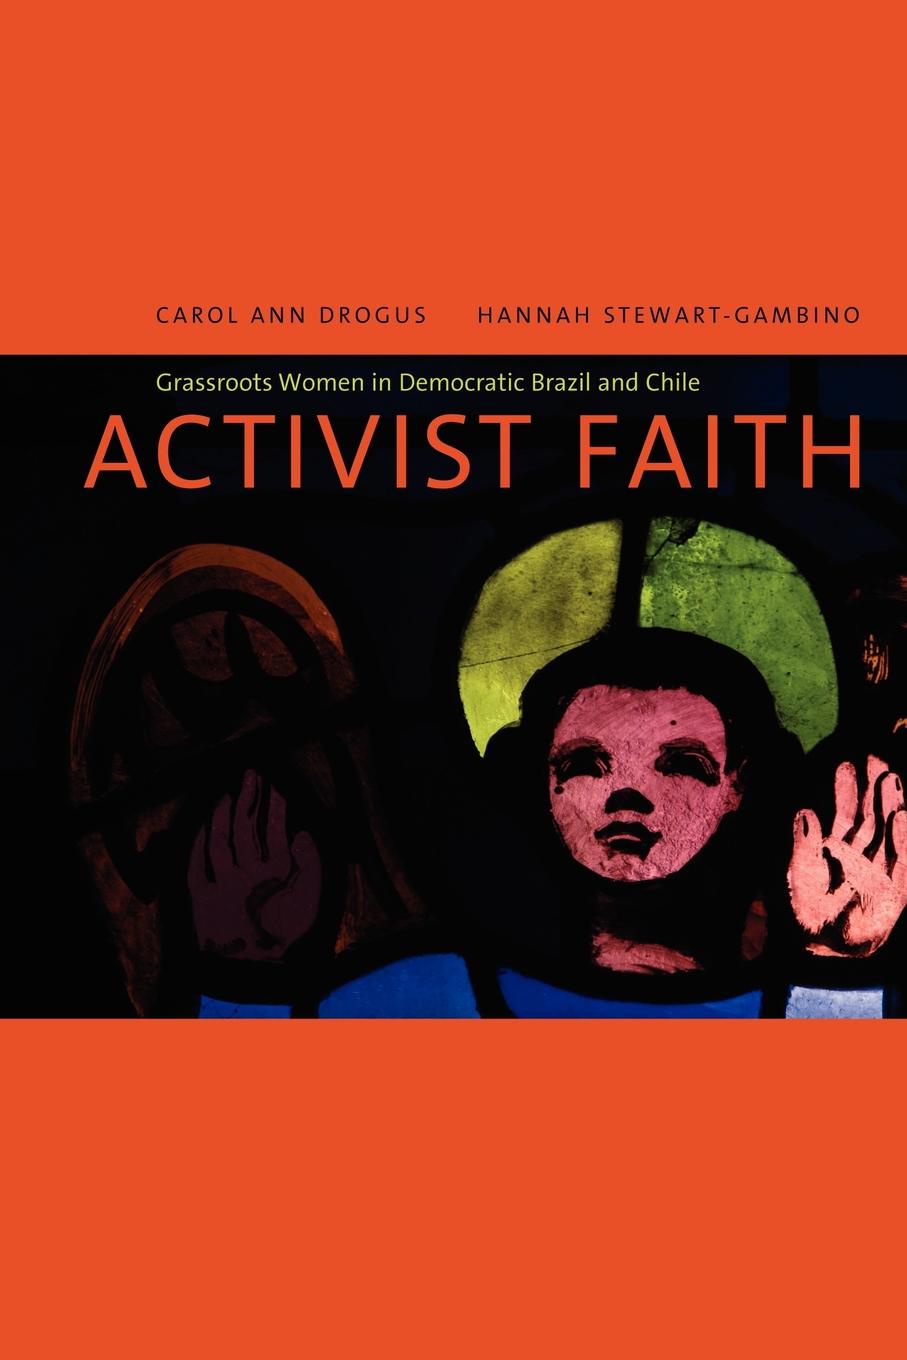 Activist Faith. Grassroots Women in Democratic Brazil and Chile